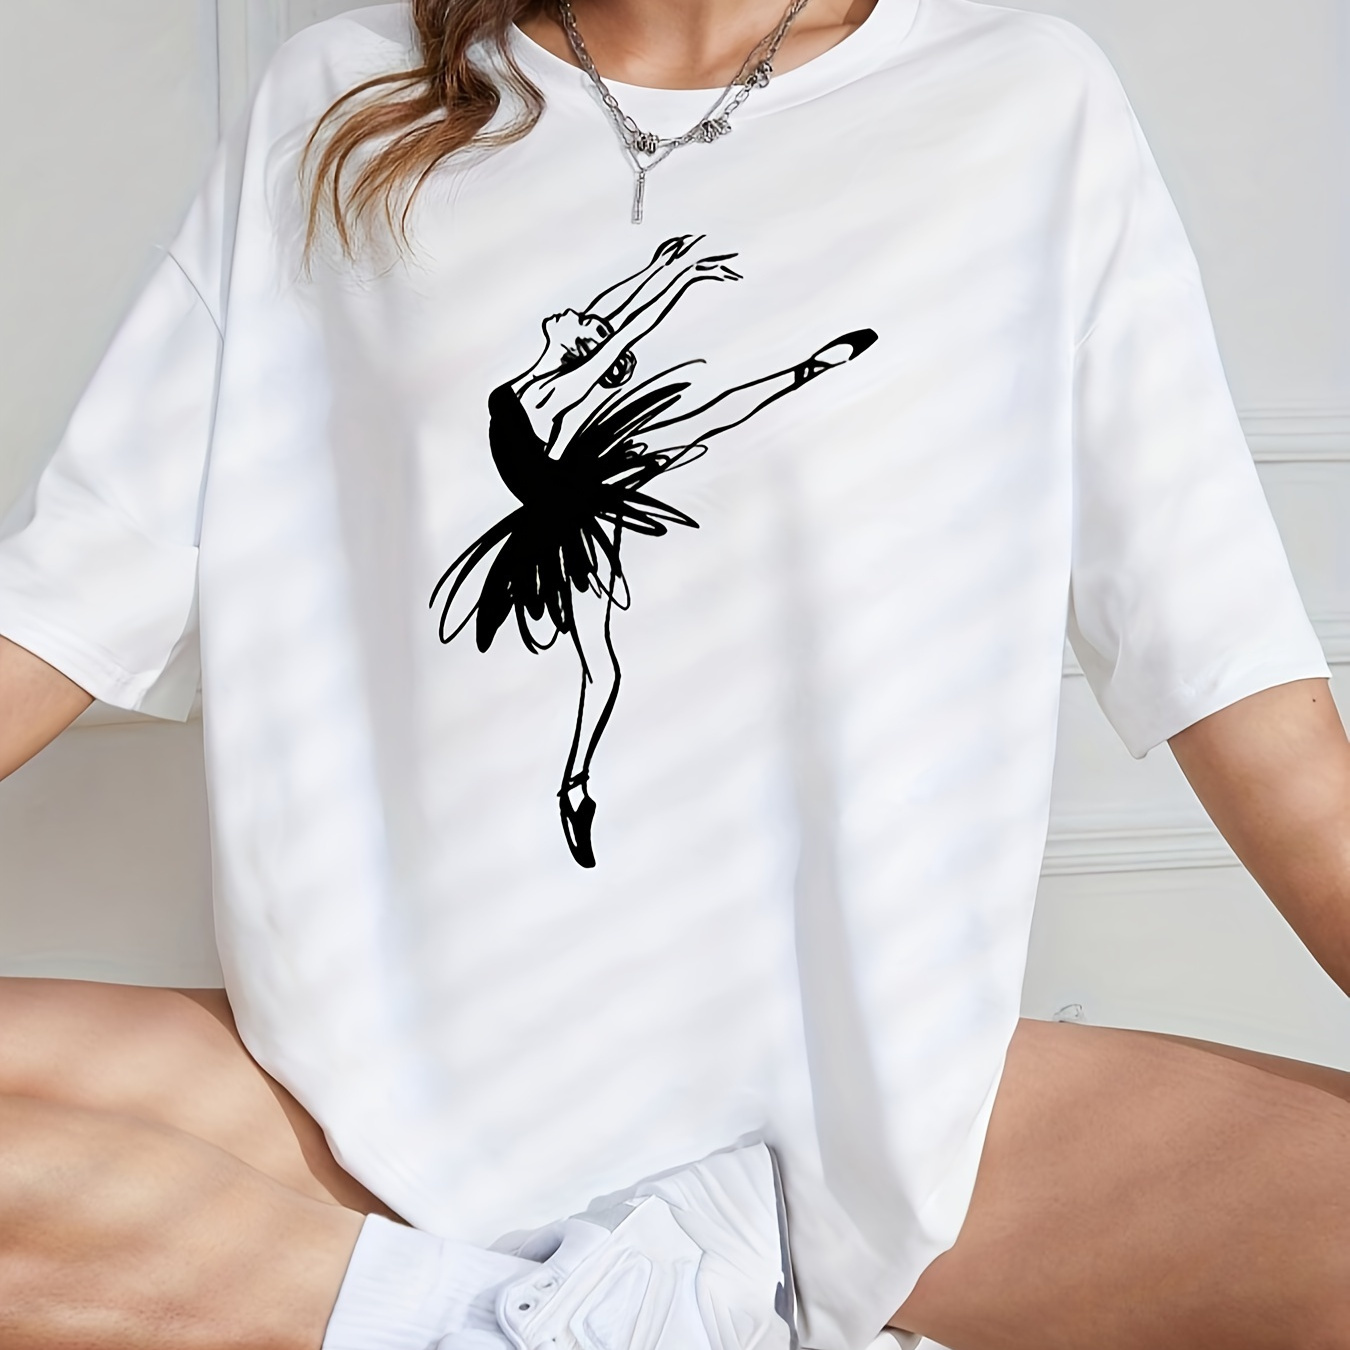 

Dancer Print T-shirt, Short Sleeve Crew Neck Casual Top For Summer & Spring, Women's Clothing